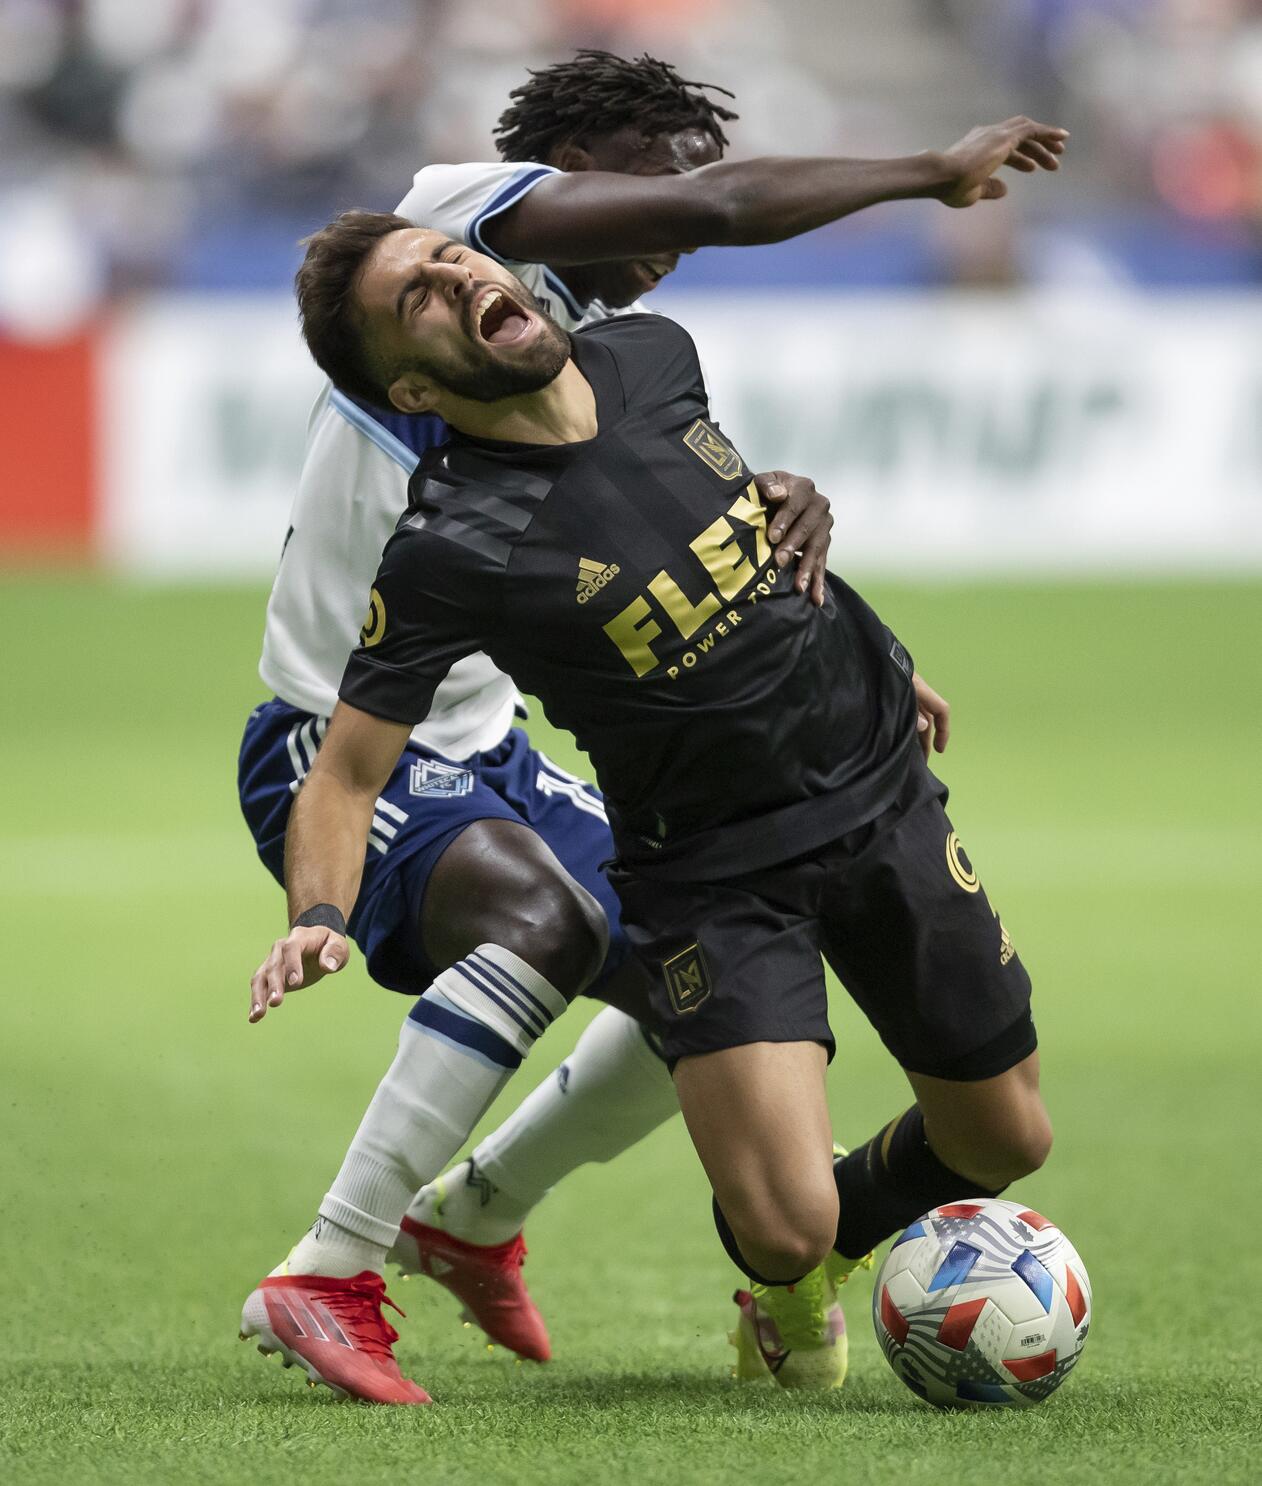 Diego Rossi, LAFC's Unheralded Quarterback, Linked With Europe's Top Clubs